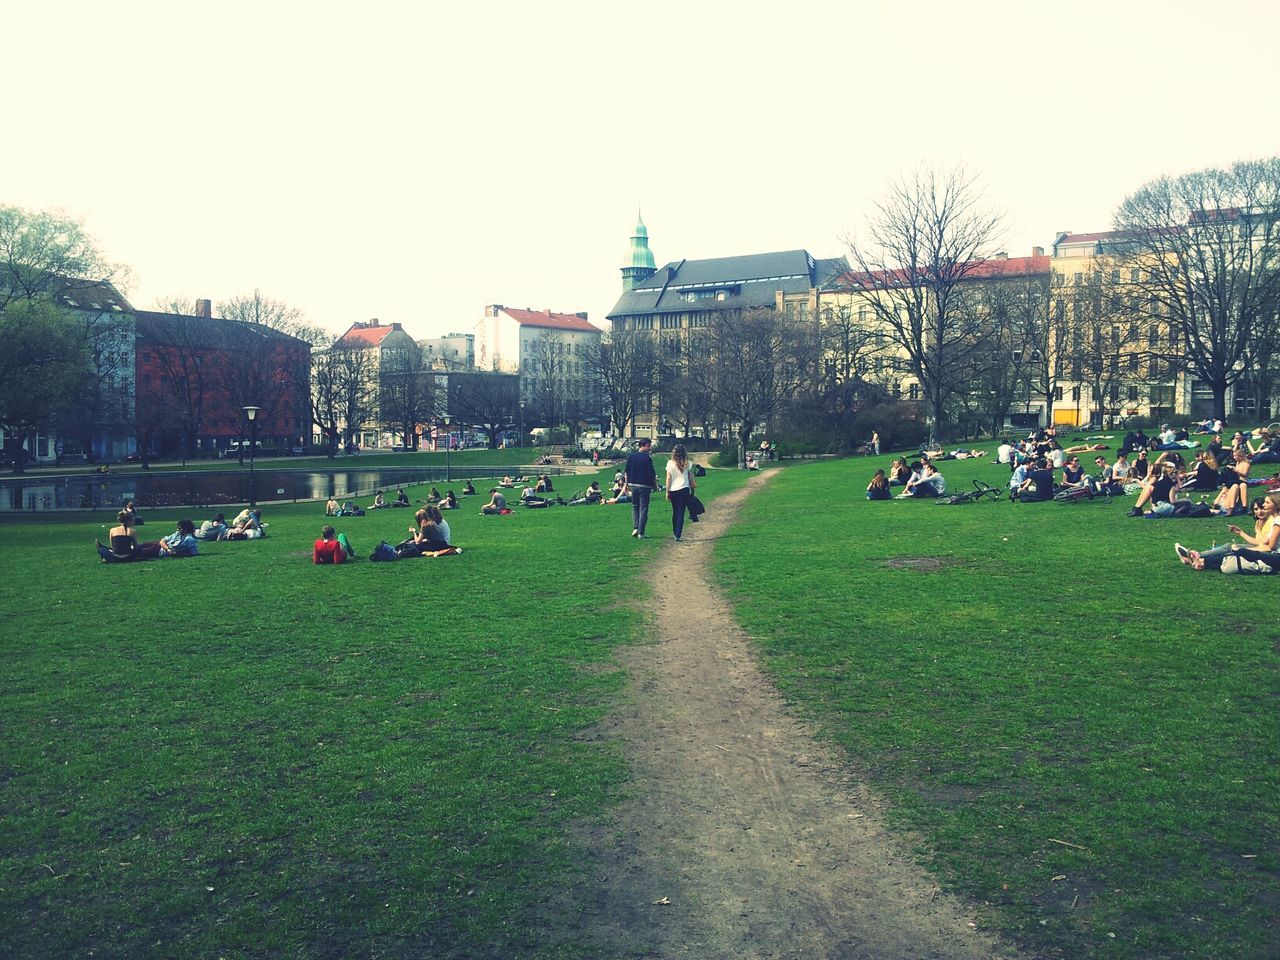 Group of people relaxing on grass against buildings